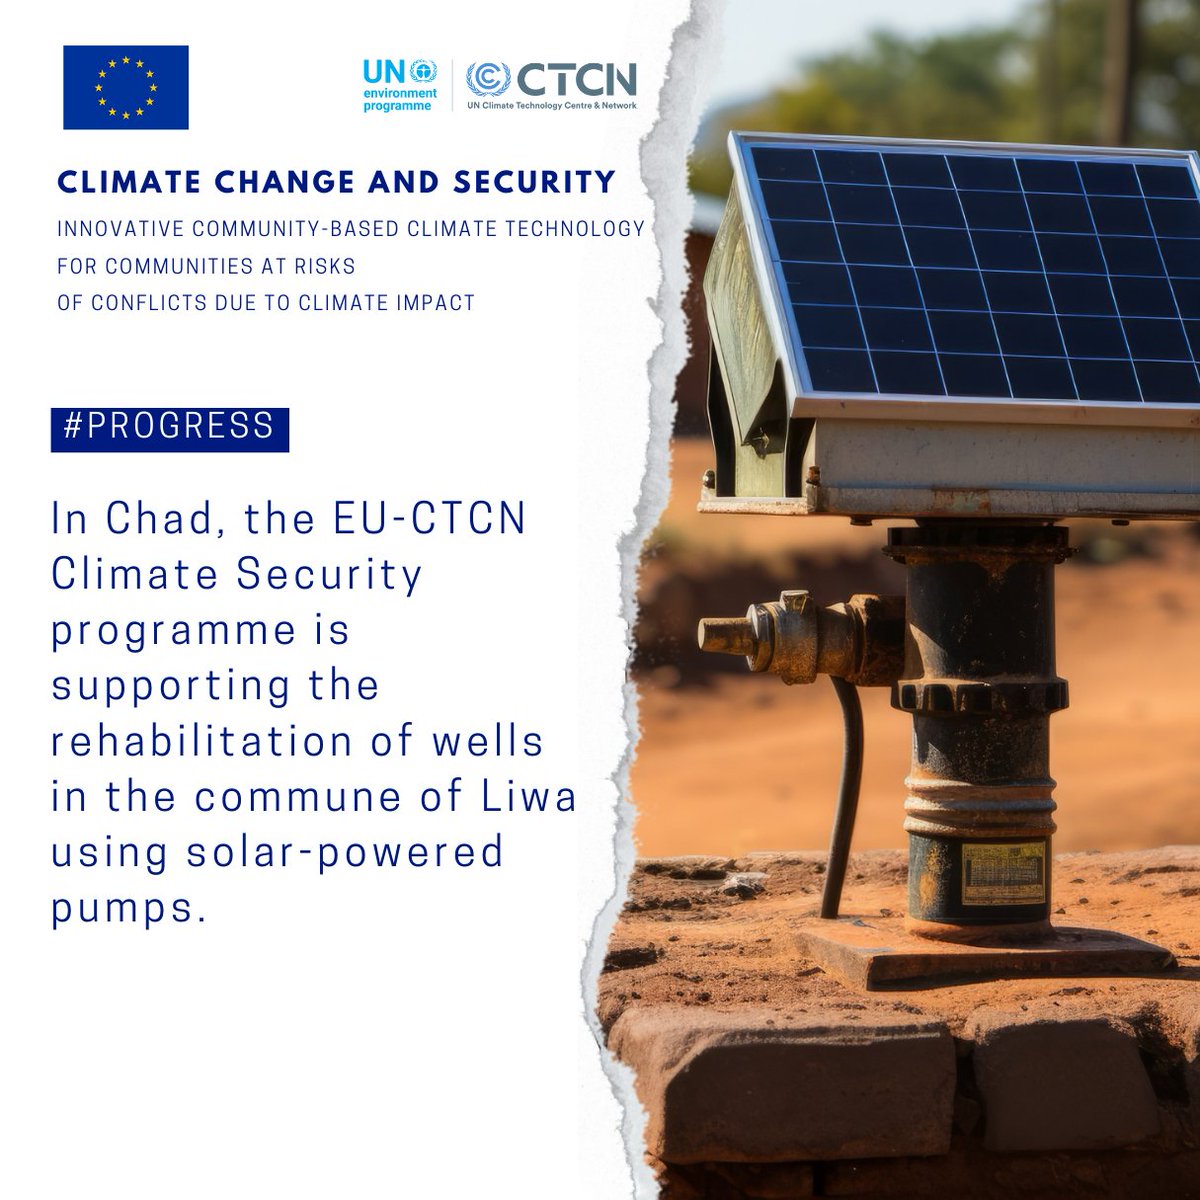 In Chad, the EU-CTCN Climate Security programme is supporting the rehabilitation of wells in the commune of Liwa using solar-powered pumps. @UNEP / @EU_Commission / @UNFCCC